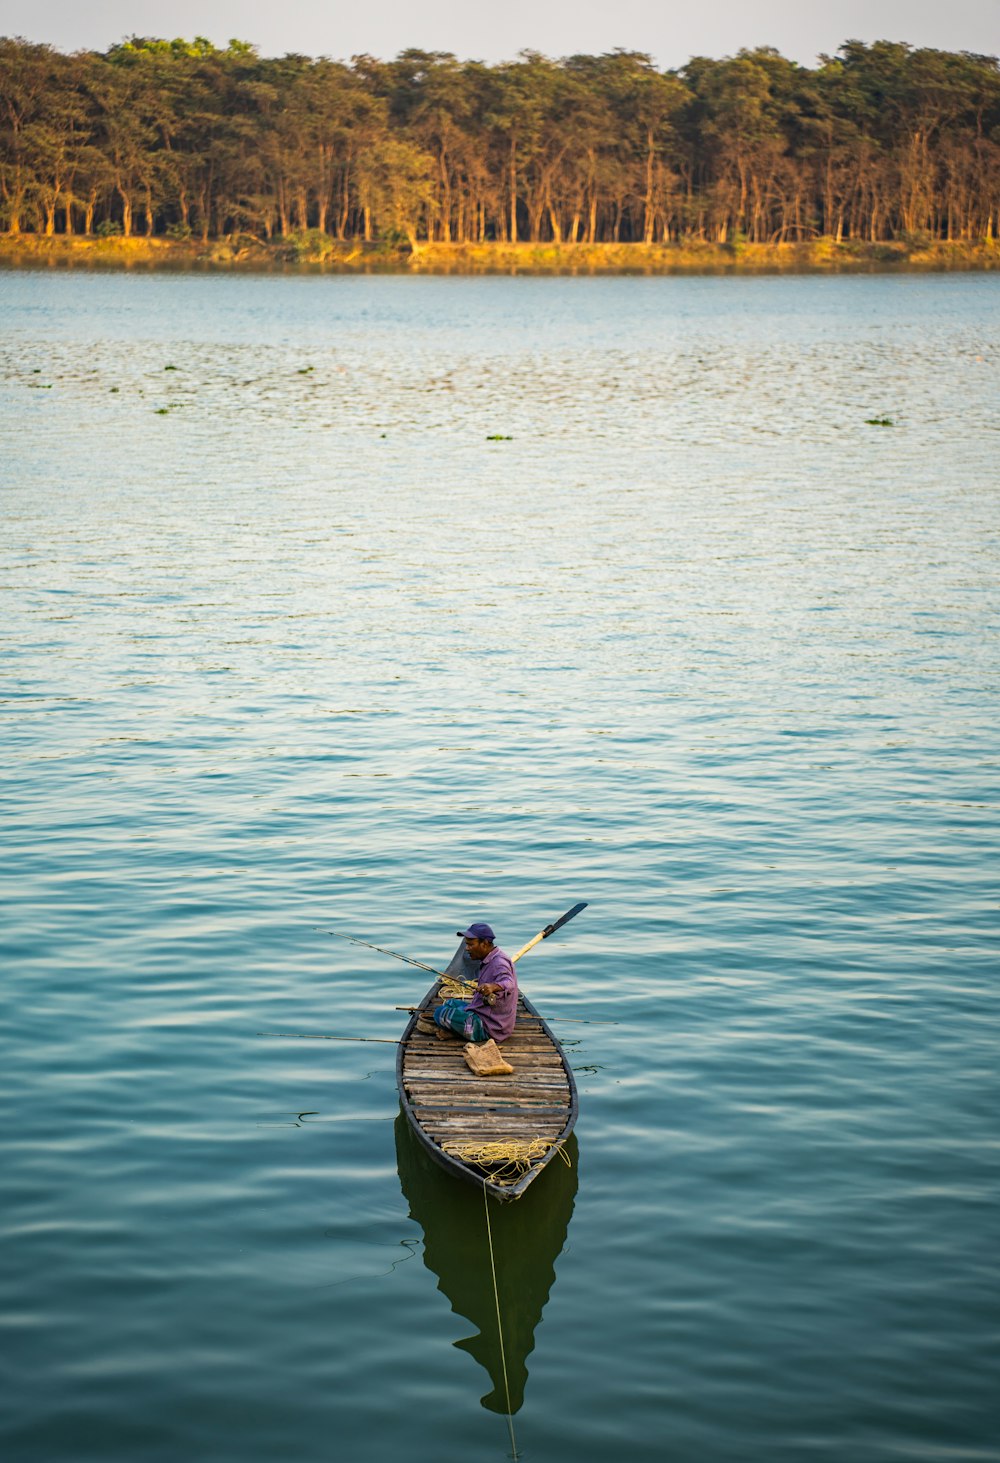 a person in a small boat on a lake